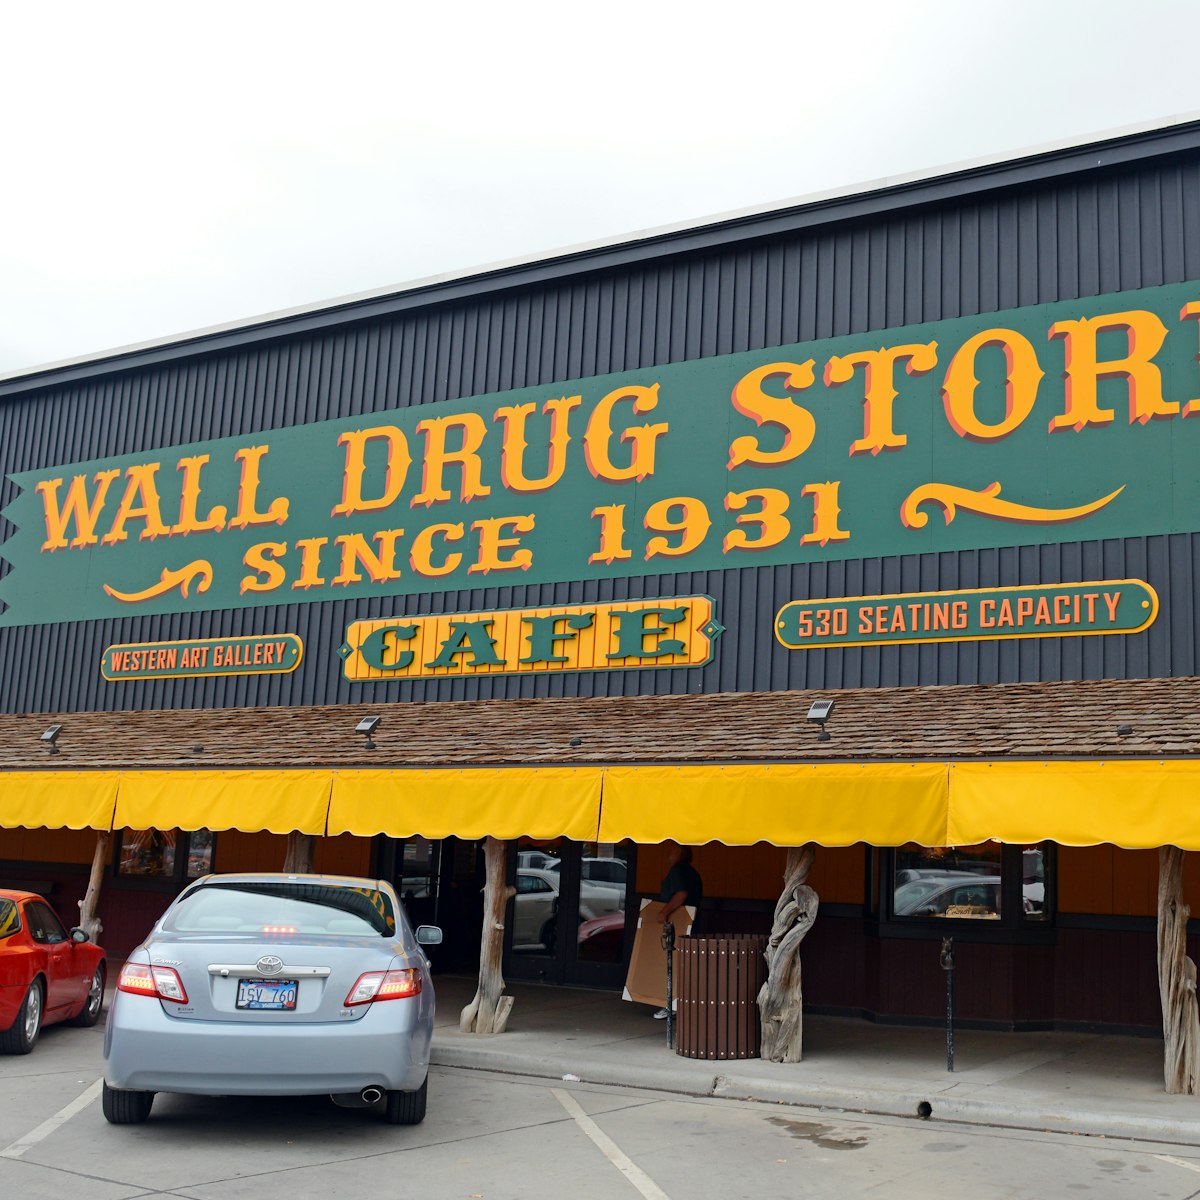 From its humble beginning as a small drug store, Wall Drug has grown into an international tourist attraction for an otherwise small town in rural South Dakota.